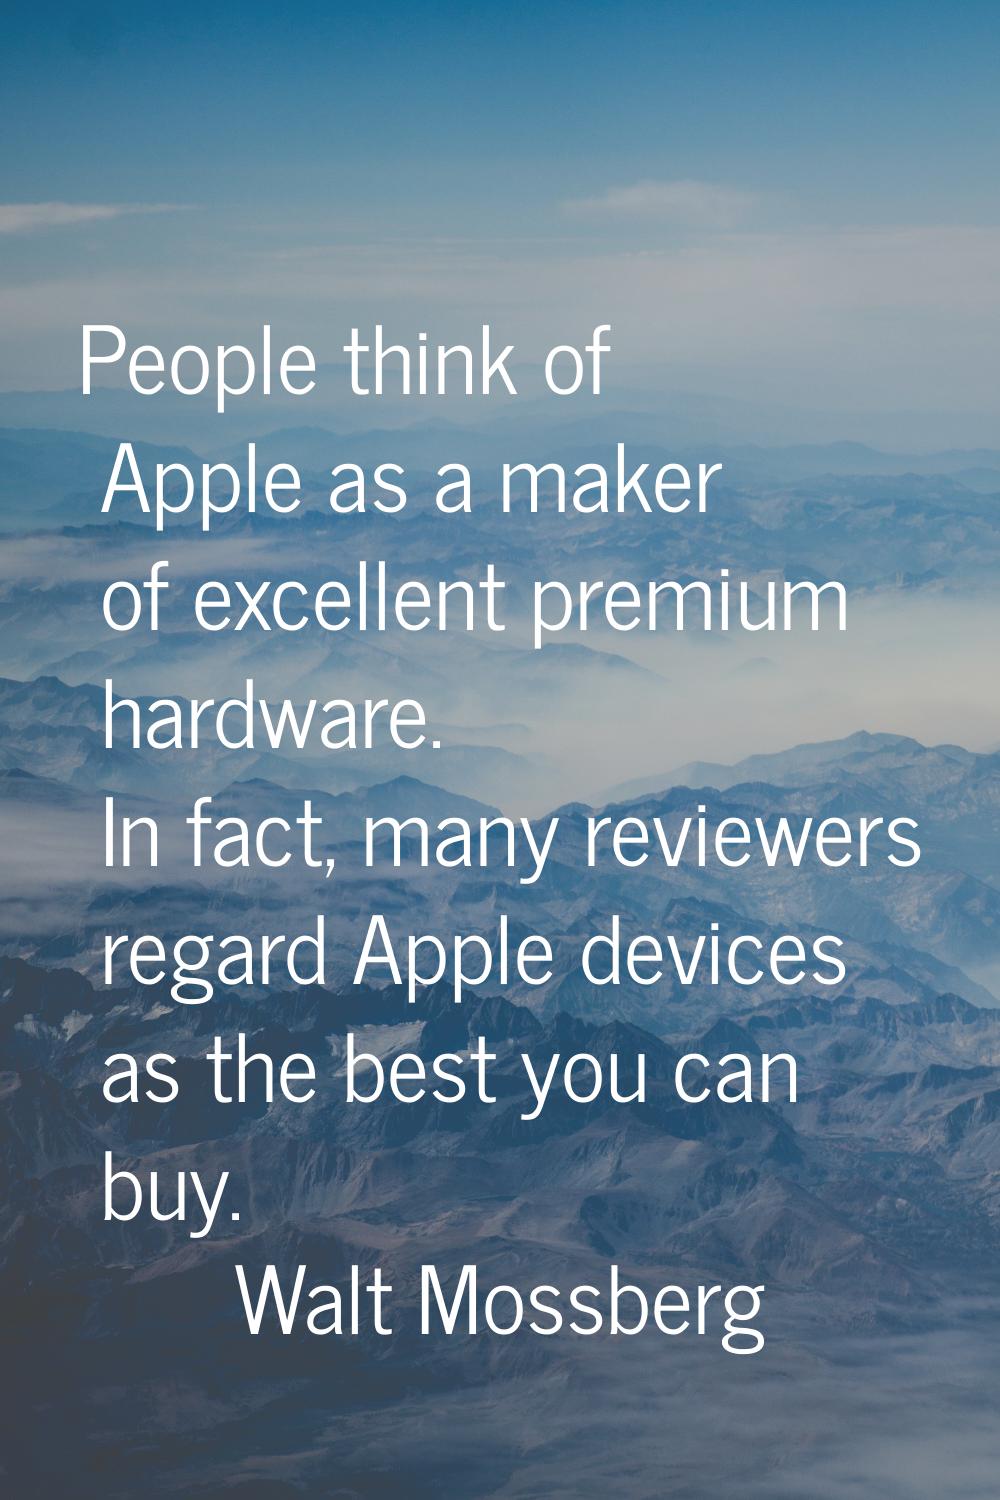 People think of Apple as a maker of excellent premium hardware. In fact, many reviewers regard Appl